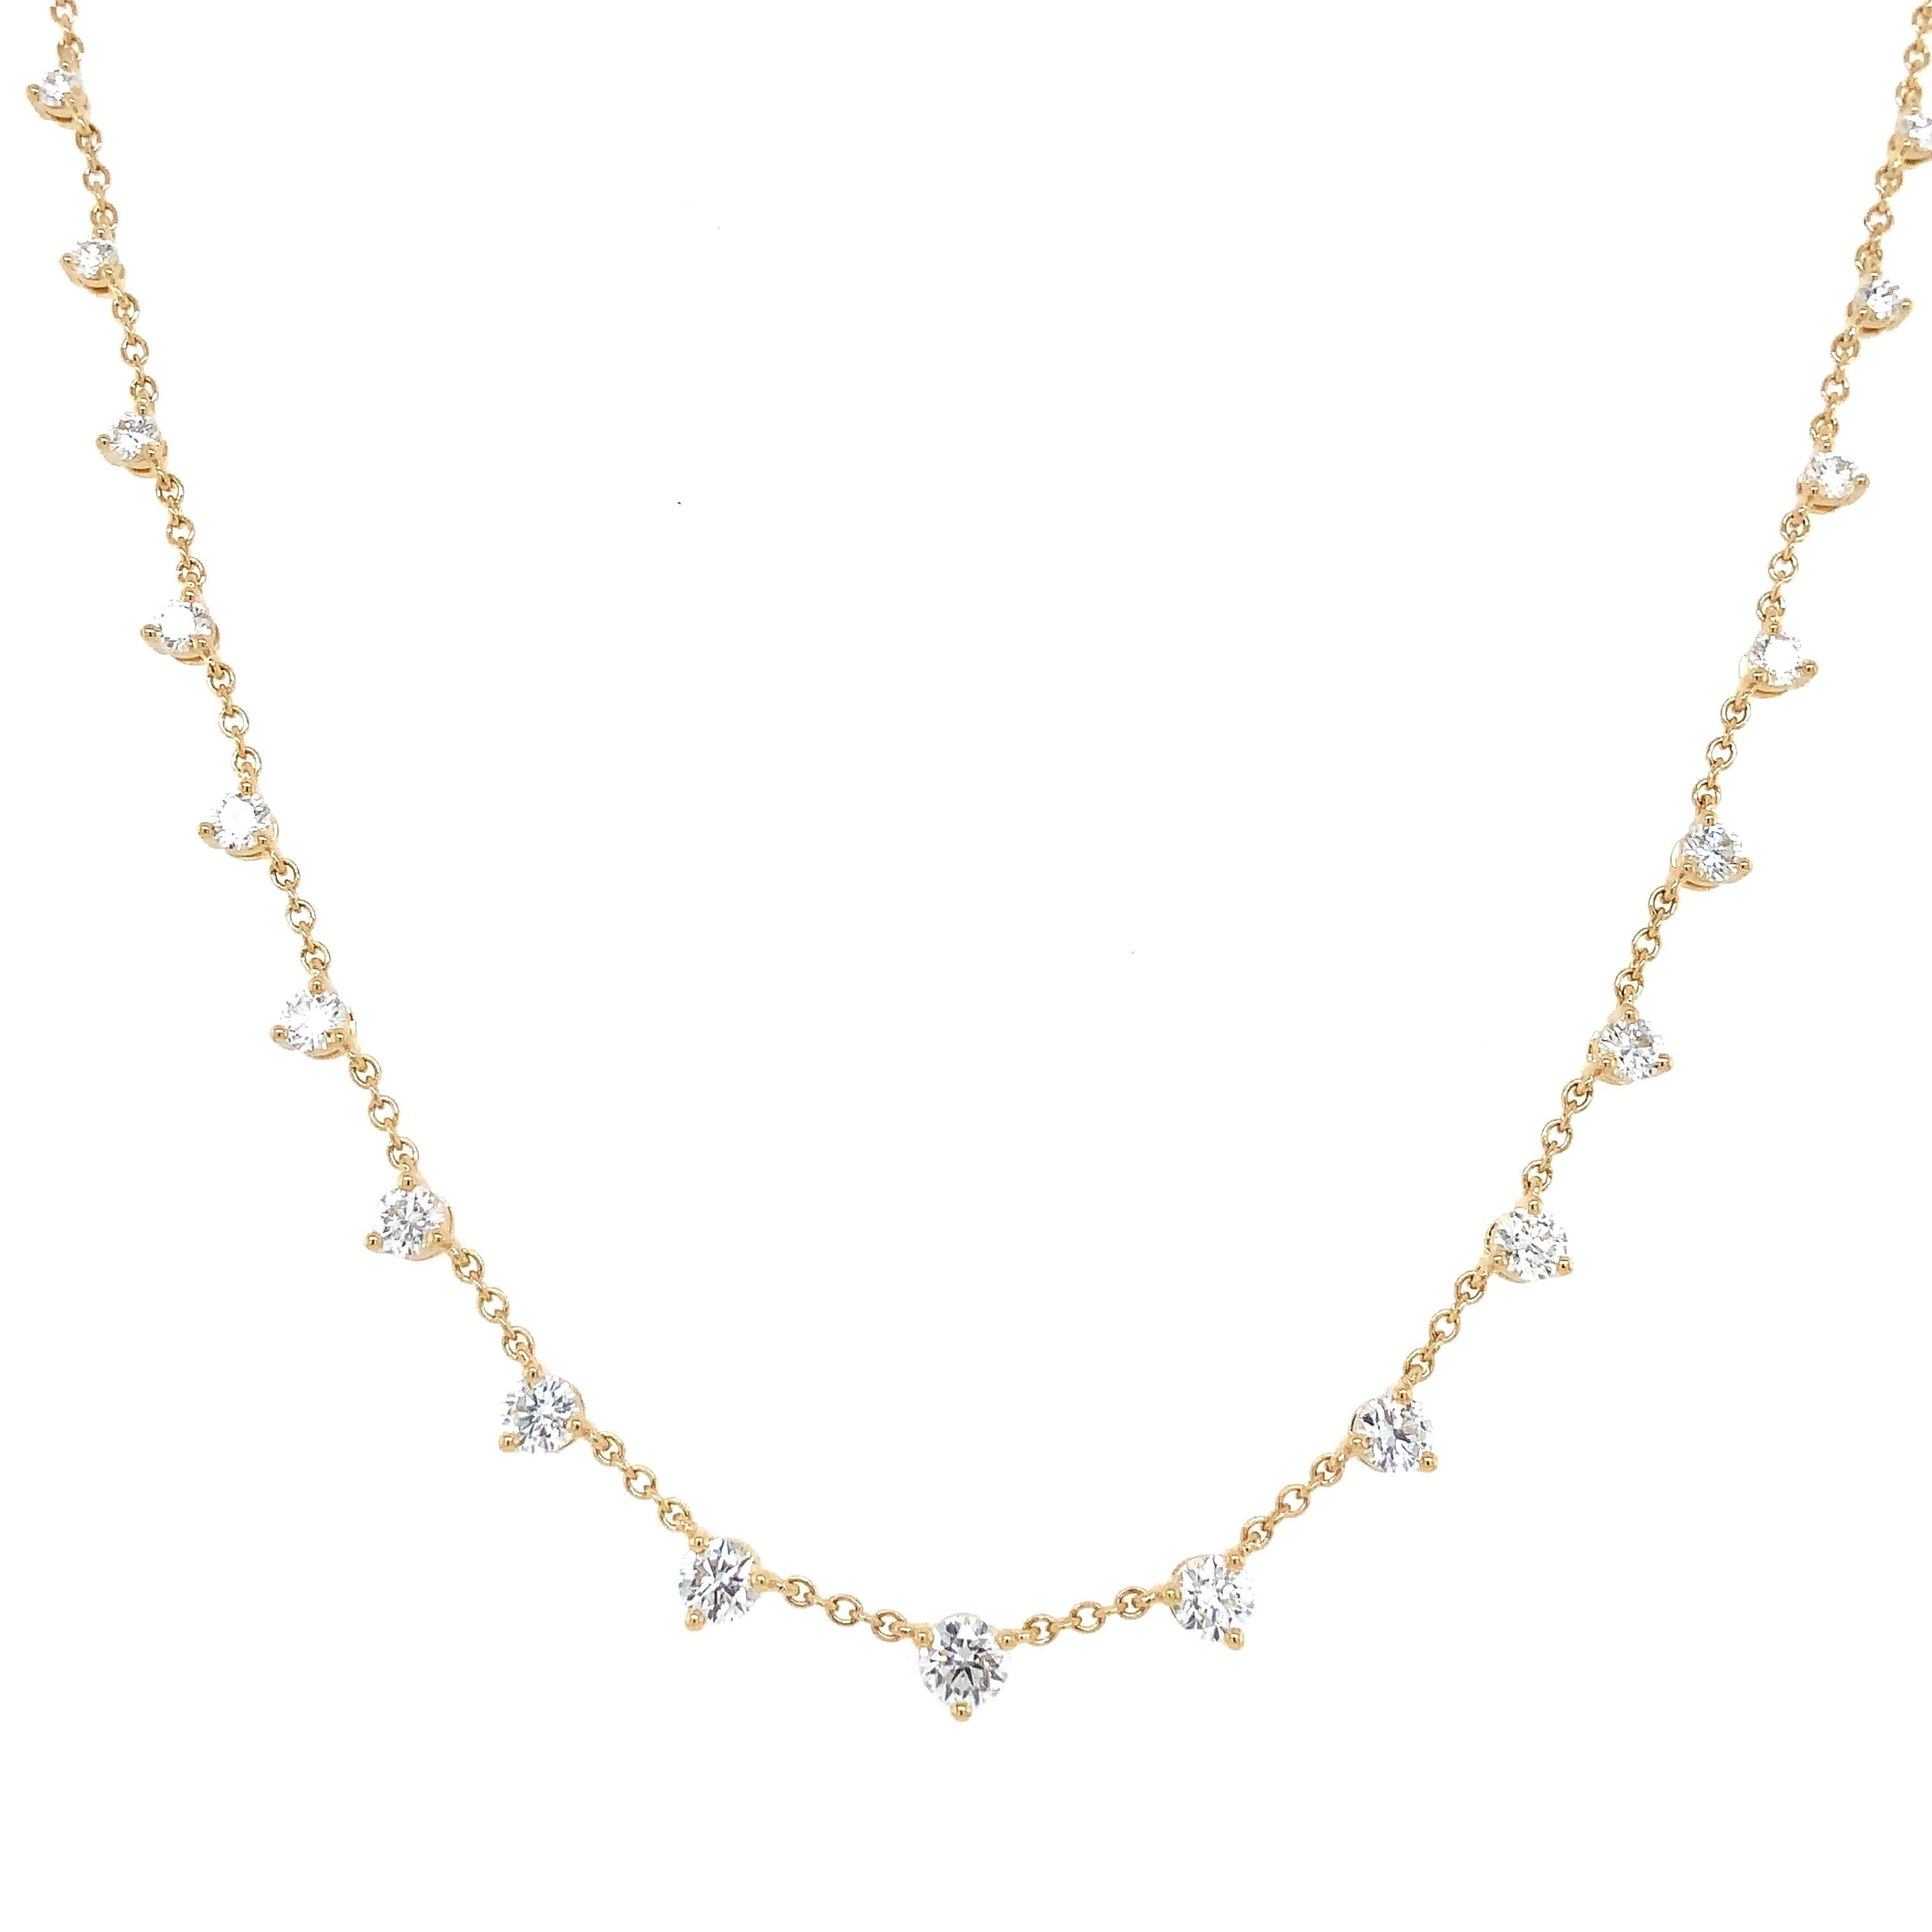 The Memoire Essential Collection 3 Prong Graduated Diamond Necklace set in 18K Yellow Gold features 21 Round Brilliant Cut Diamonds of 1.18ct. tw., boasting F-G Color and VS1 Clarity. It is 18